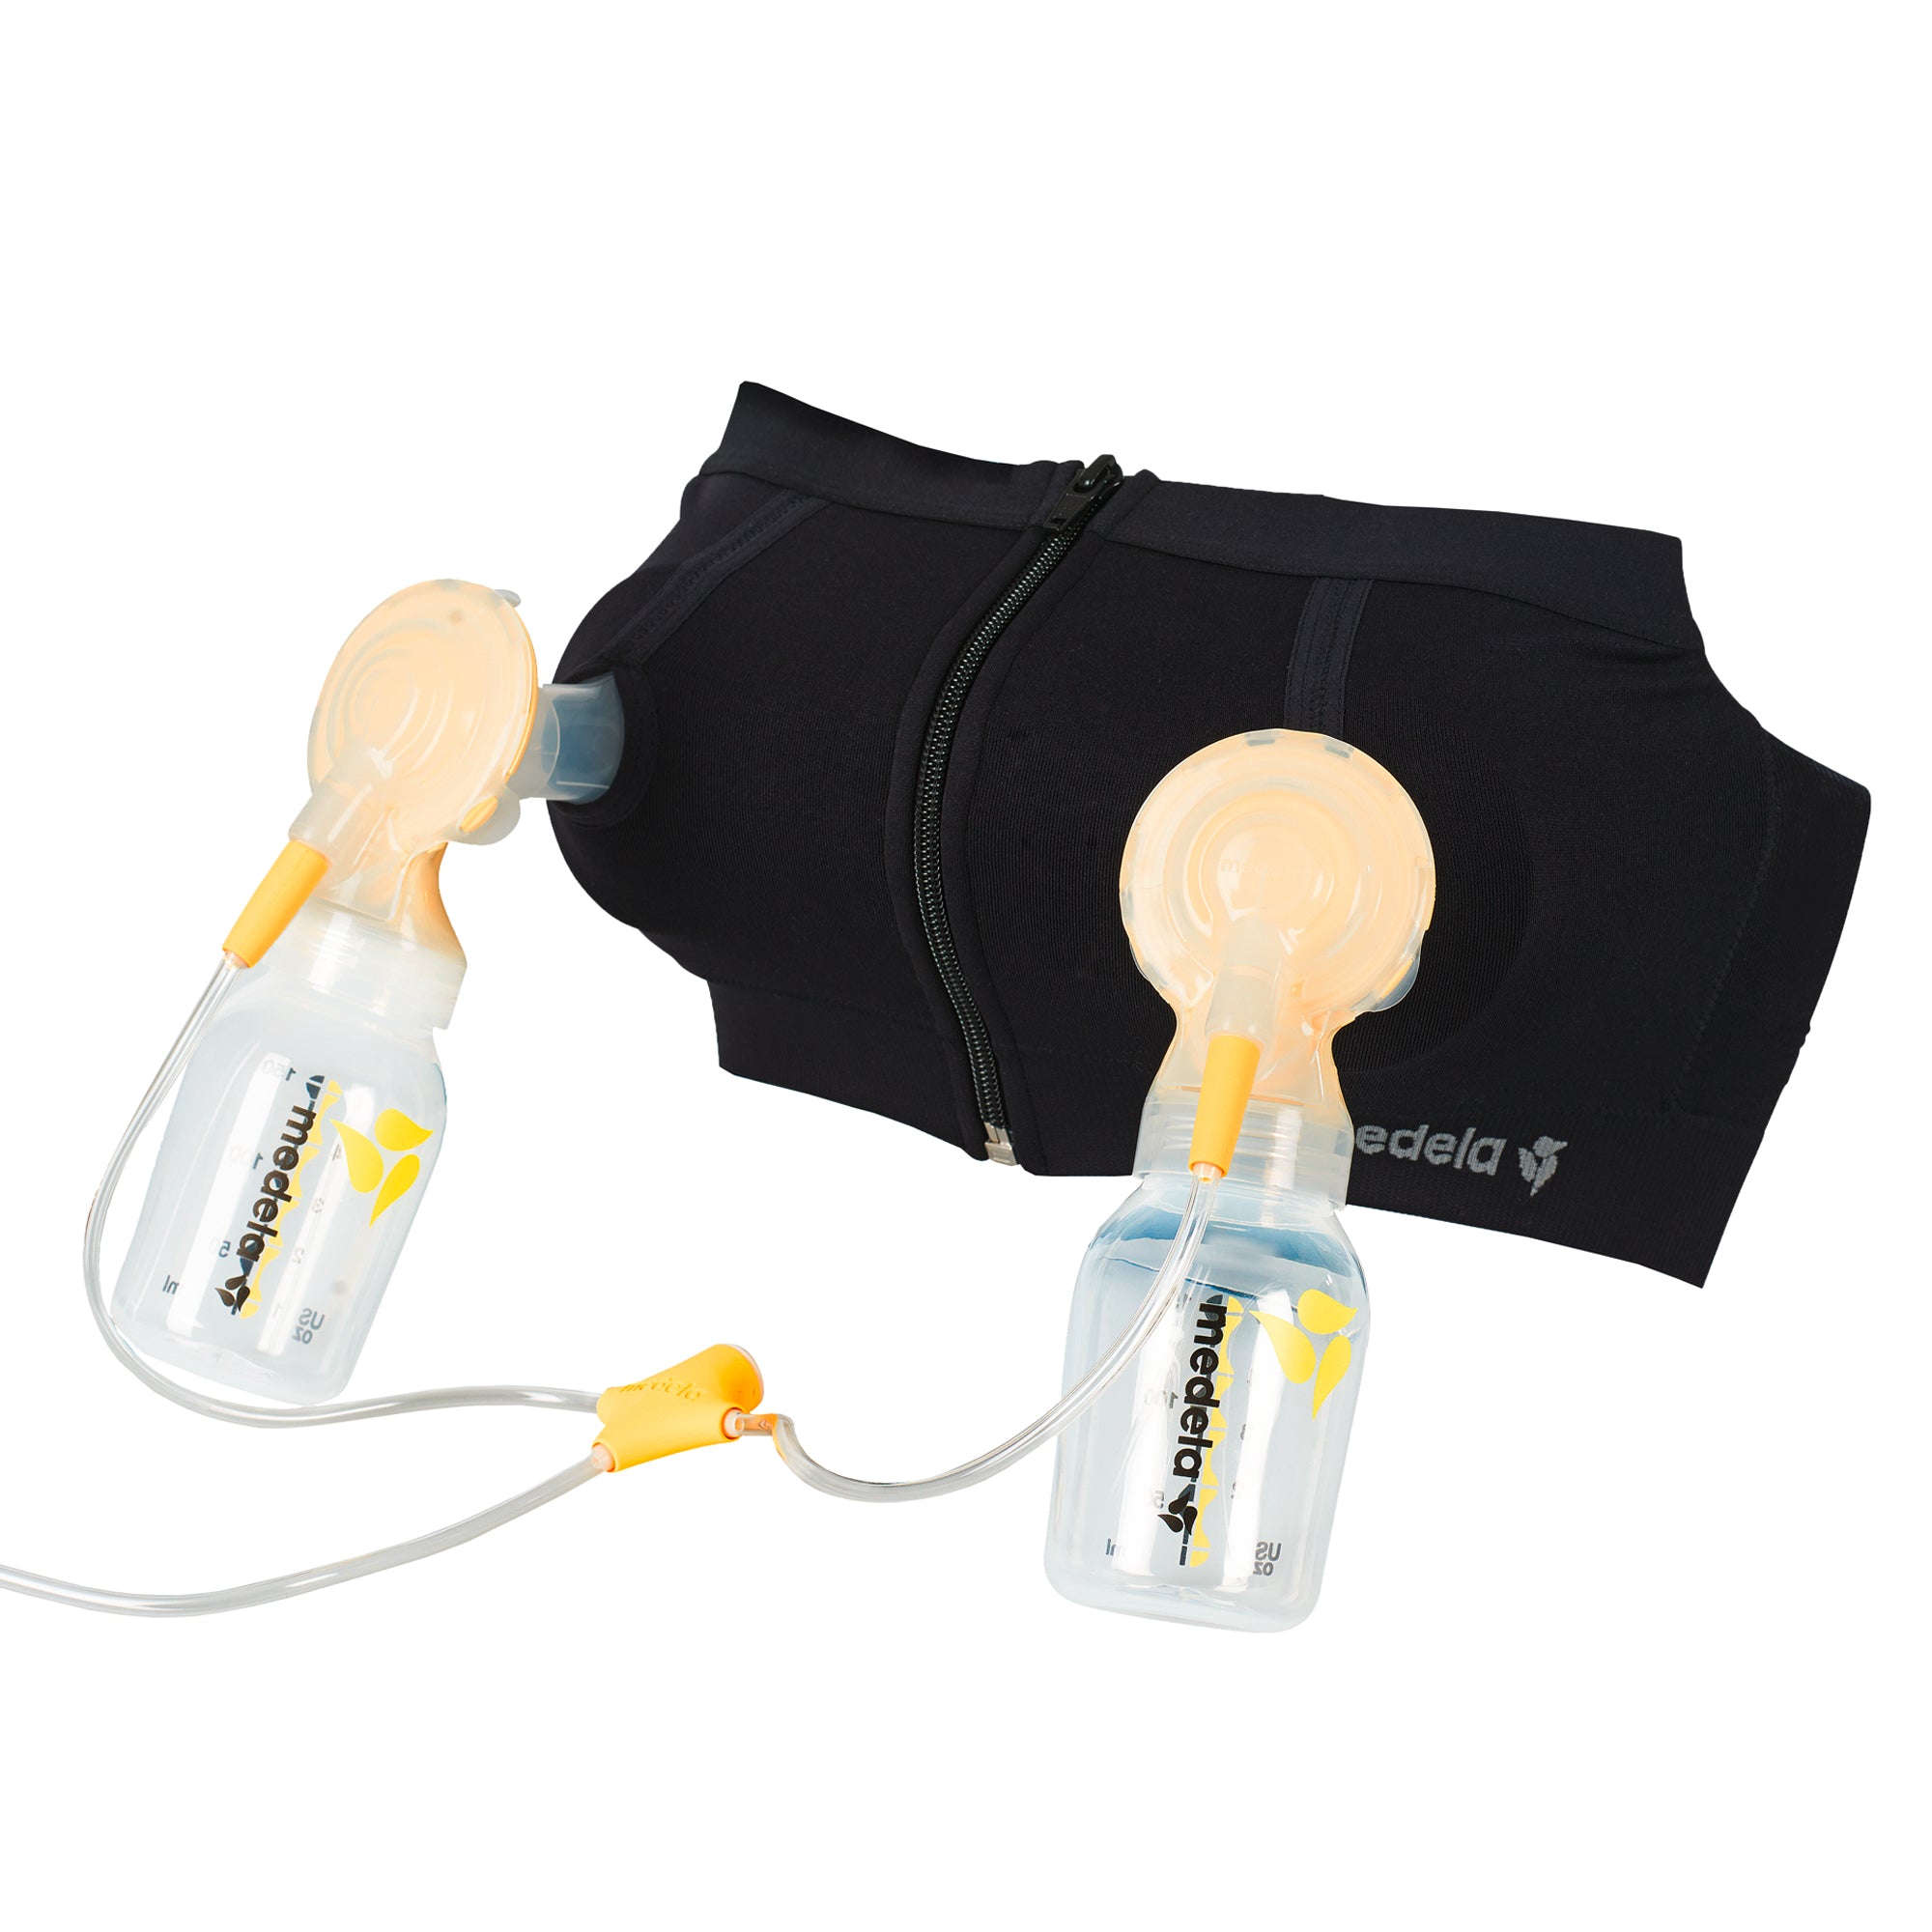 Medela Hands Free Pumping Bustier | Easy Expressing Pumping Bra with  Adaptive Stretch